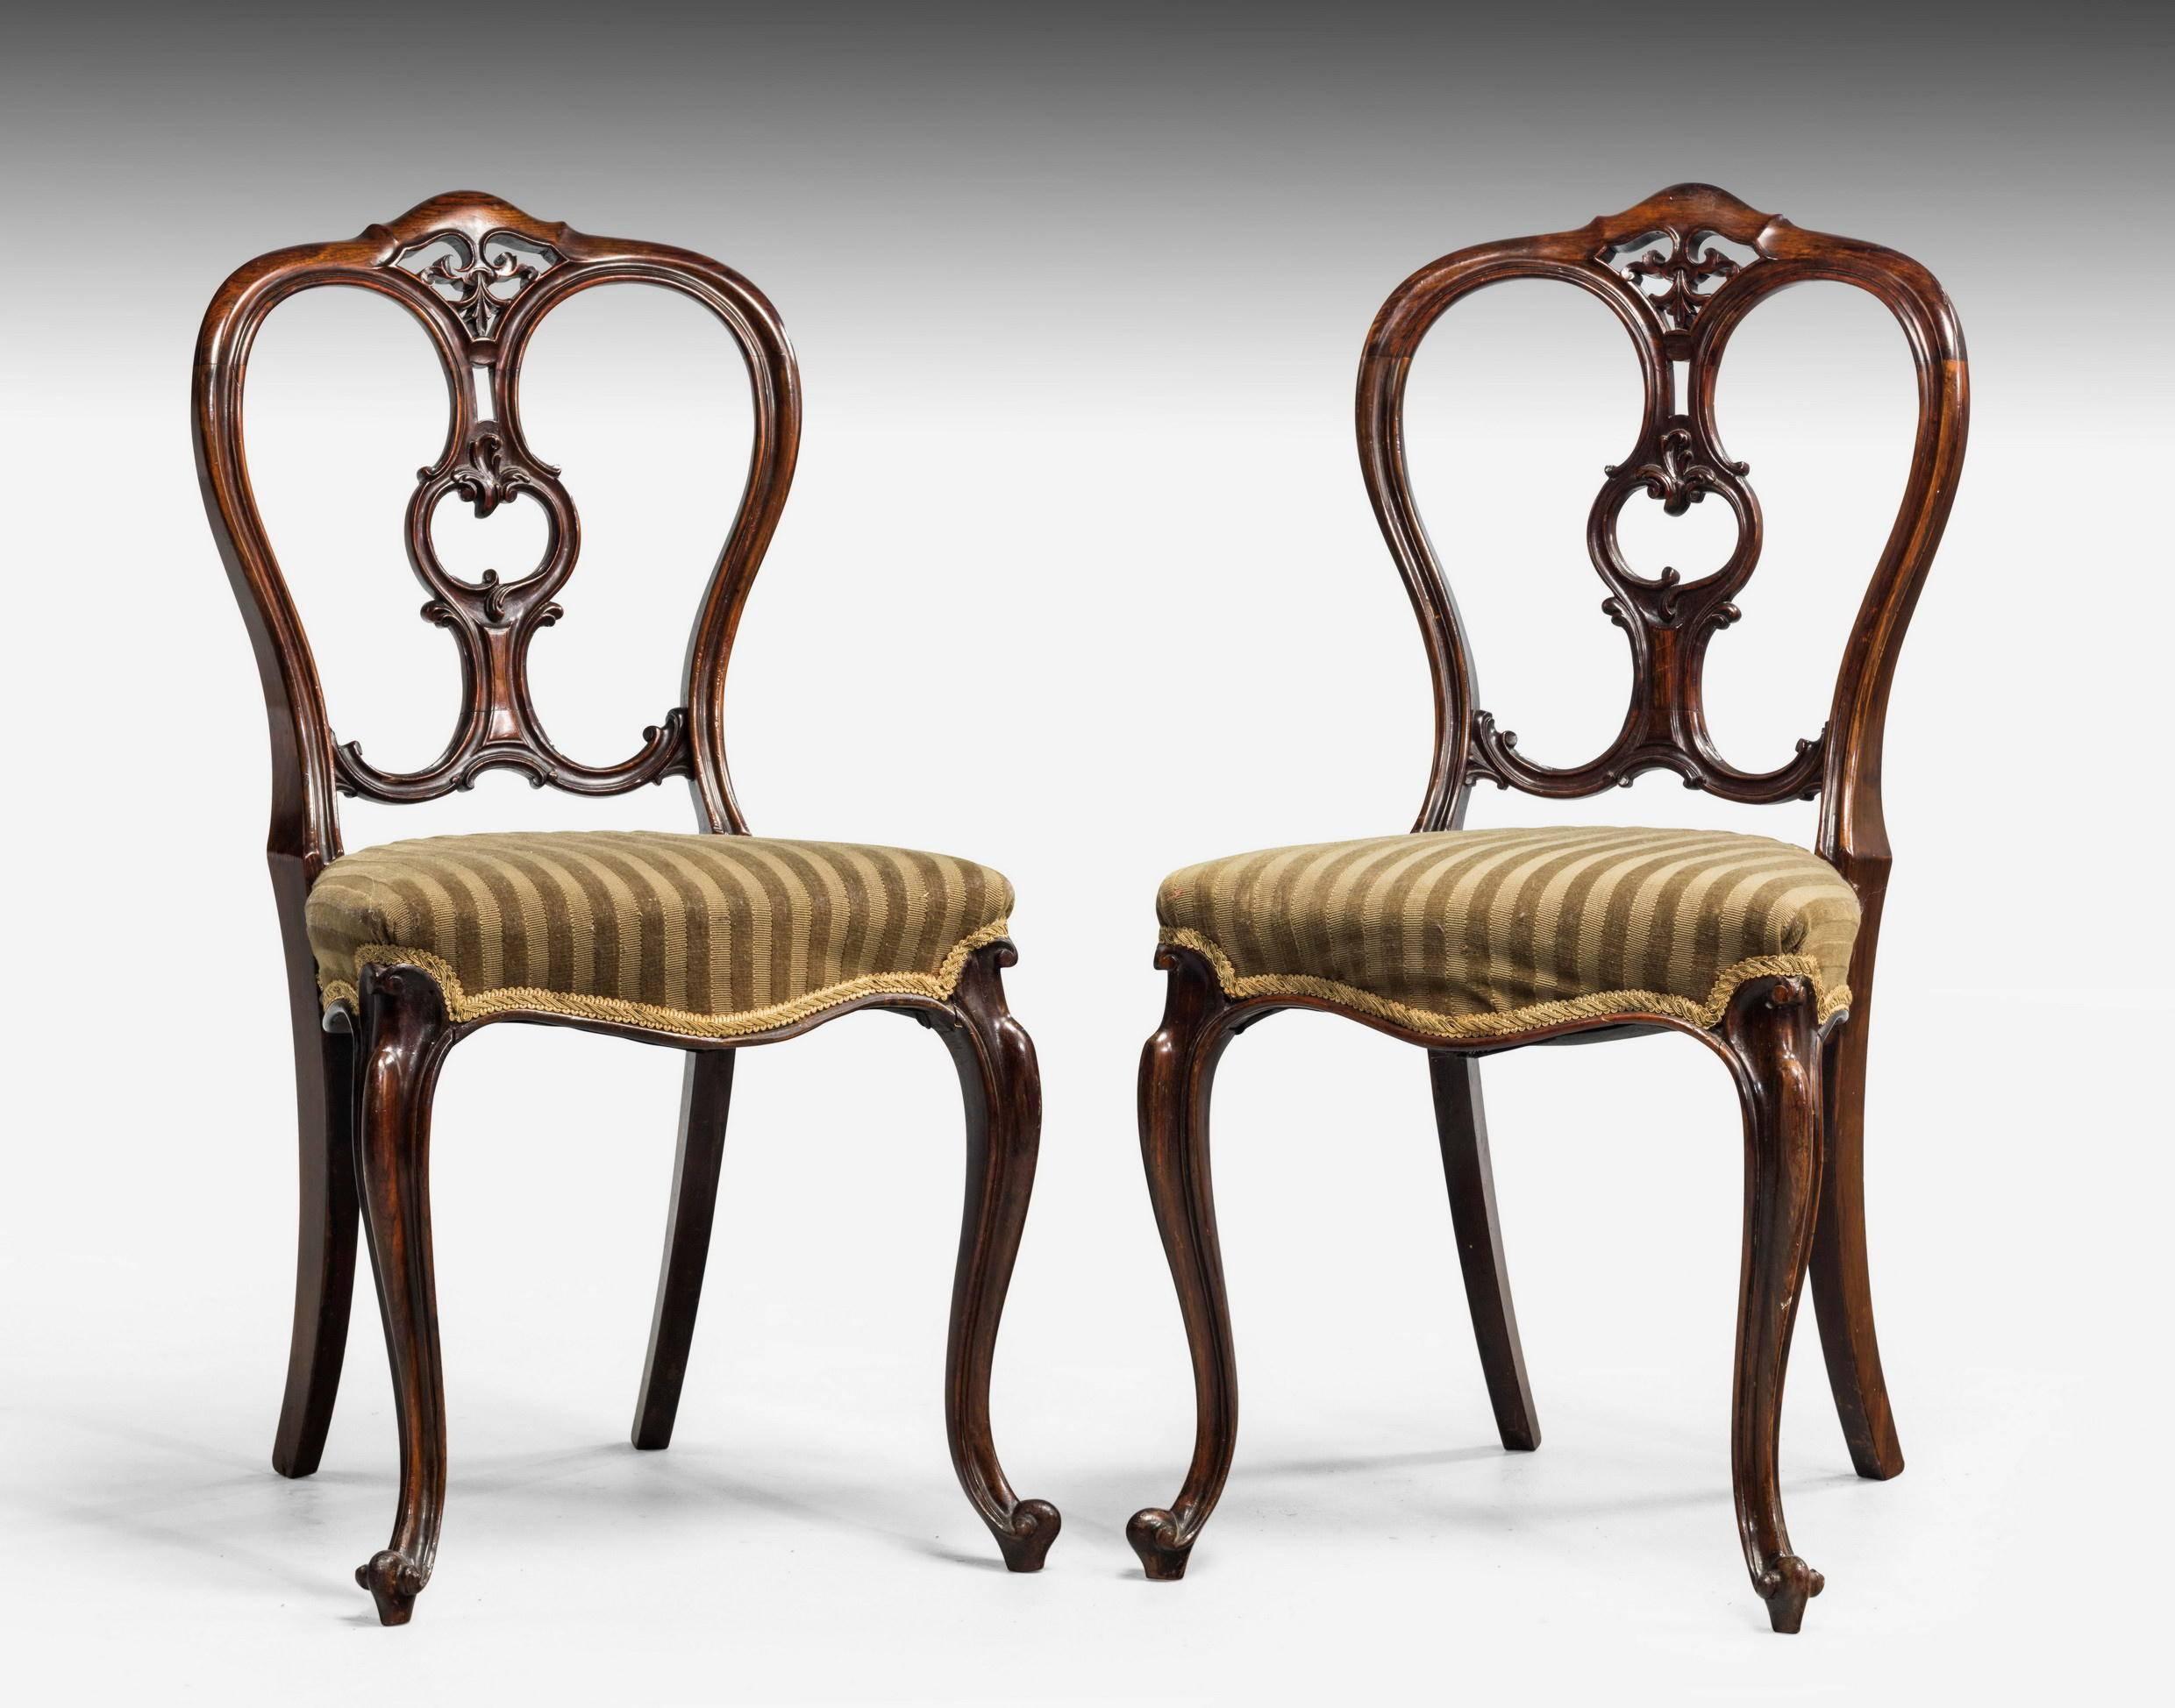 English Set of Six Mid-Victorian Balloon Back Chairs